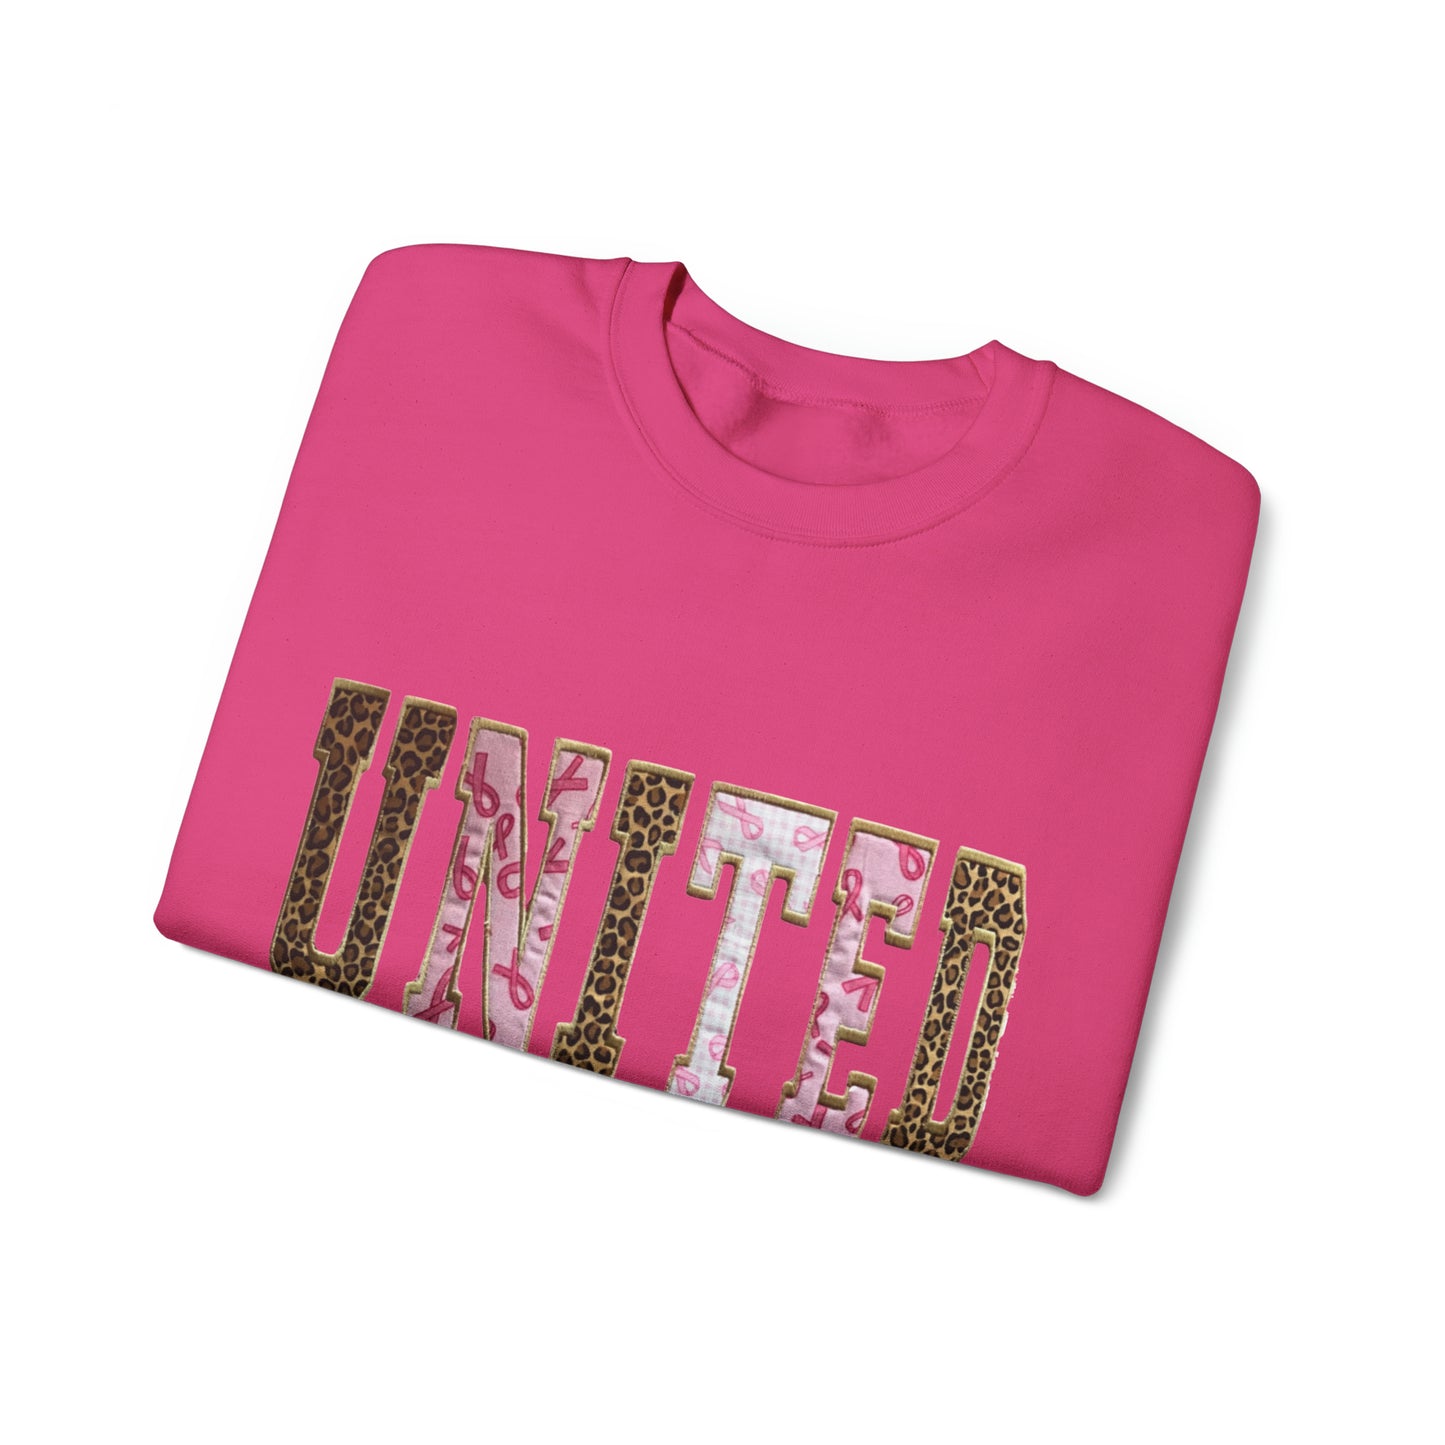 UNITED (with motto backside) Breast Cancer Awareness and Support Non-Profit Unisex Heavy Blend™ Crewneck Sweatshirt